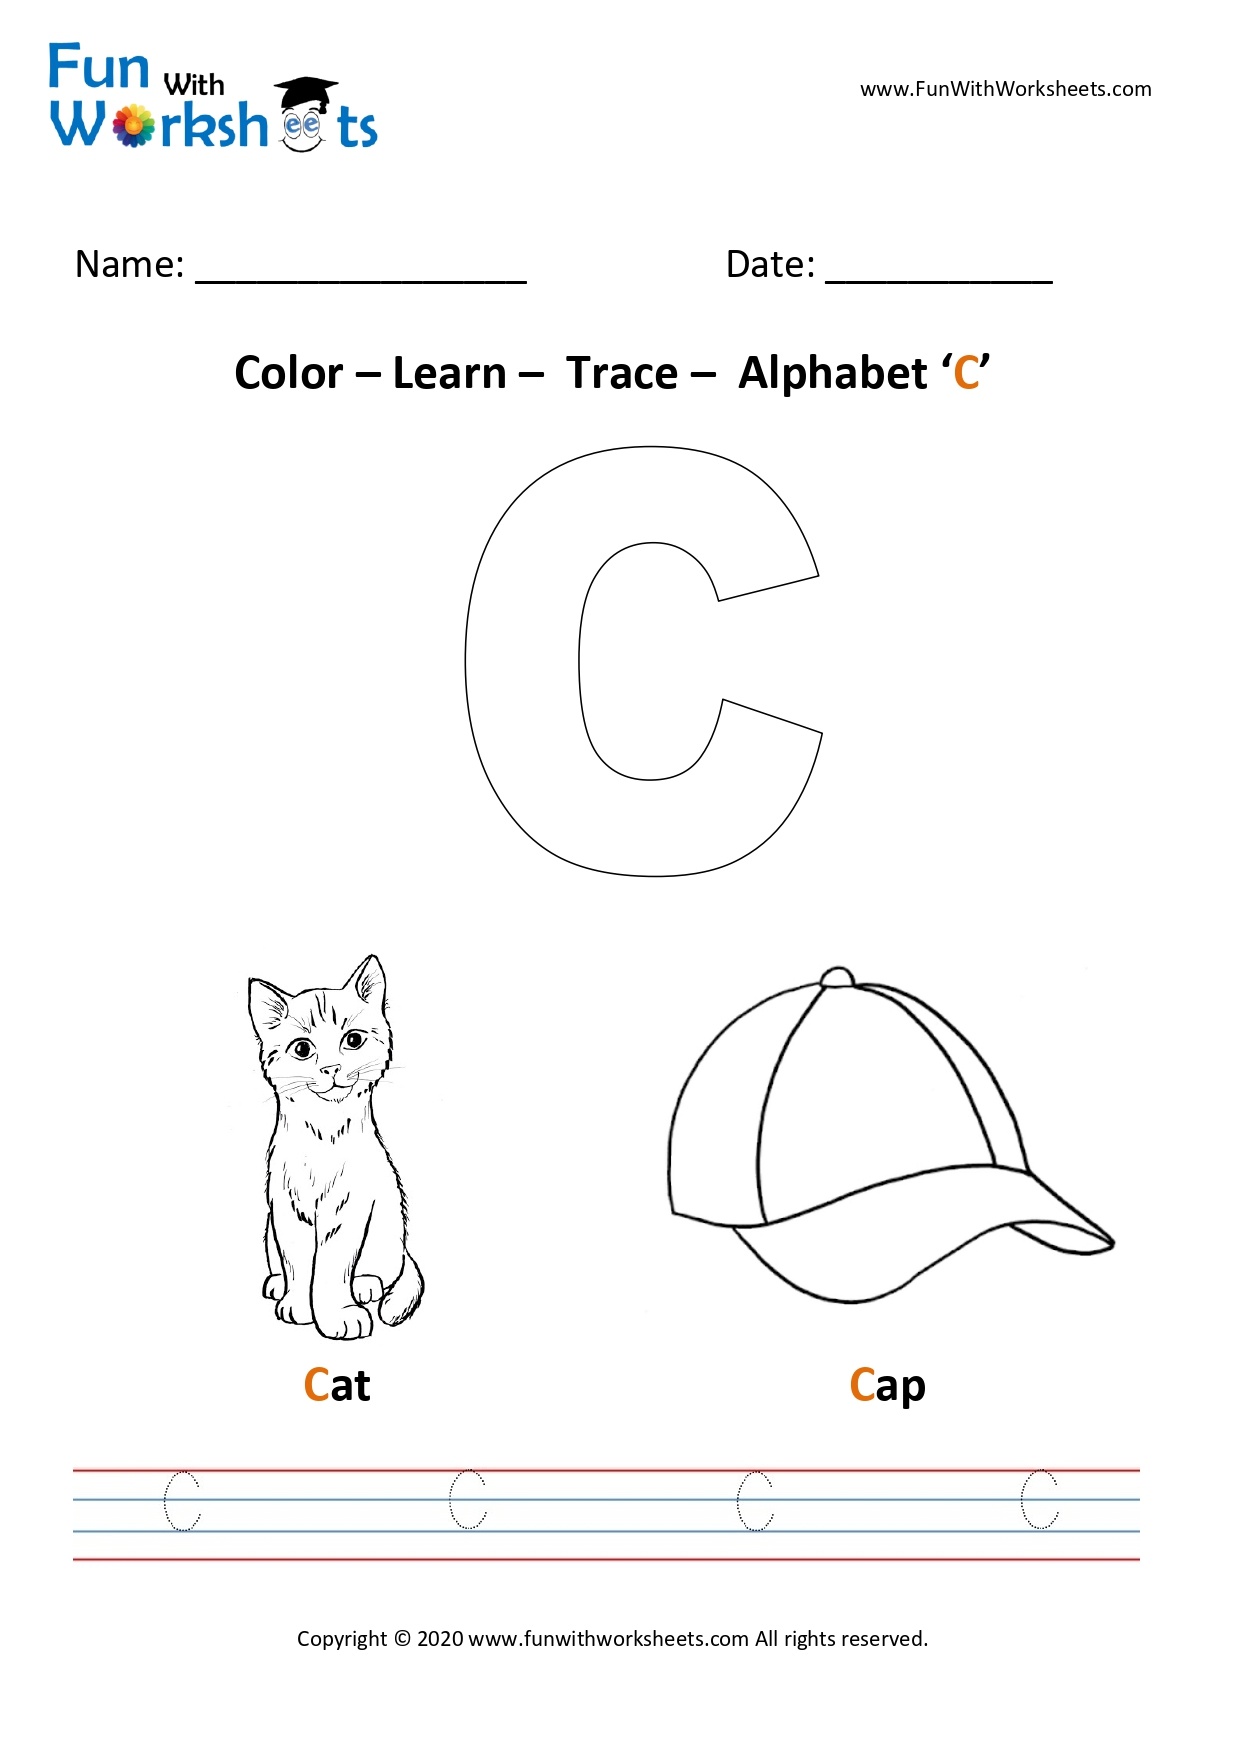 Capital letter c color learn and trace